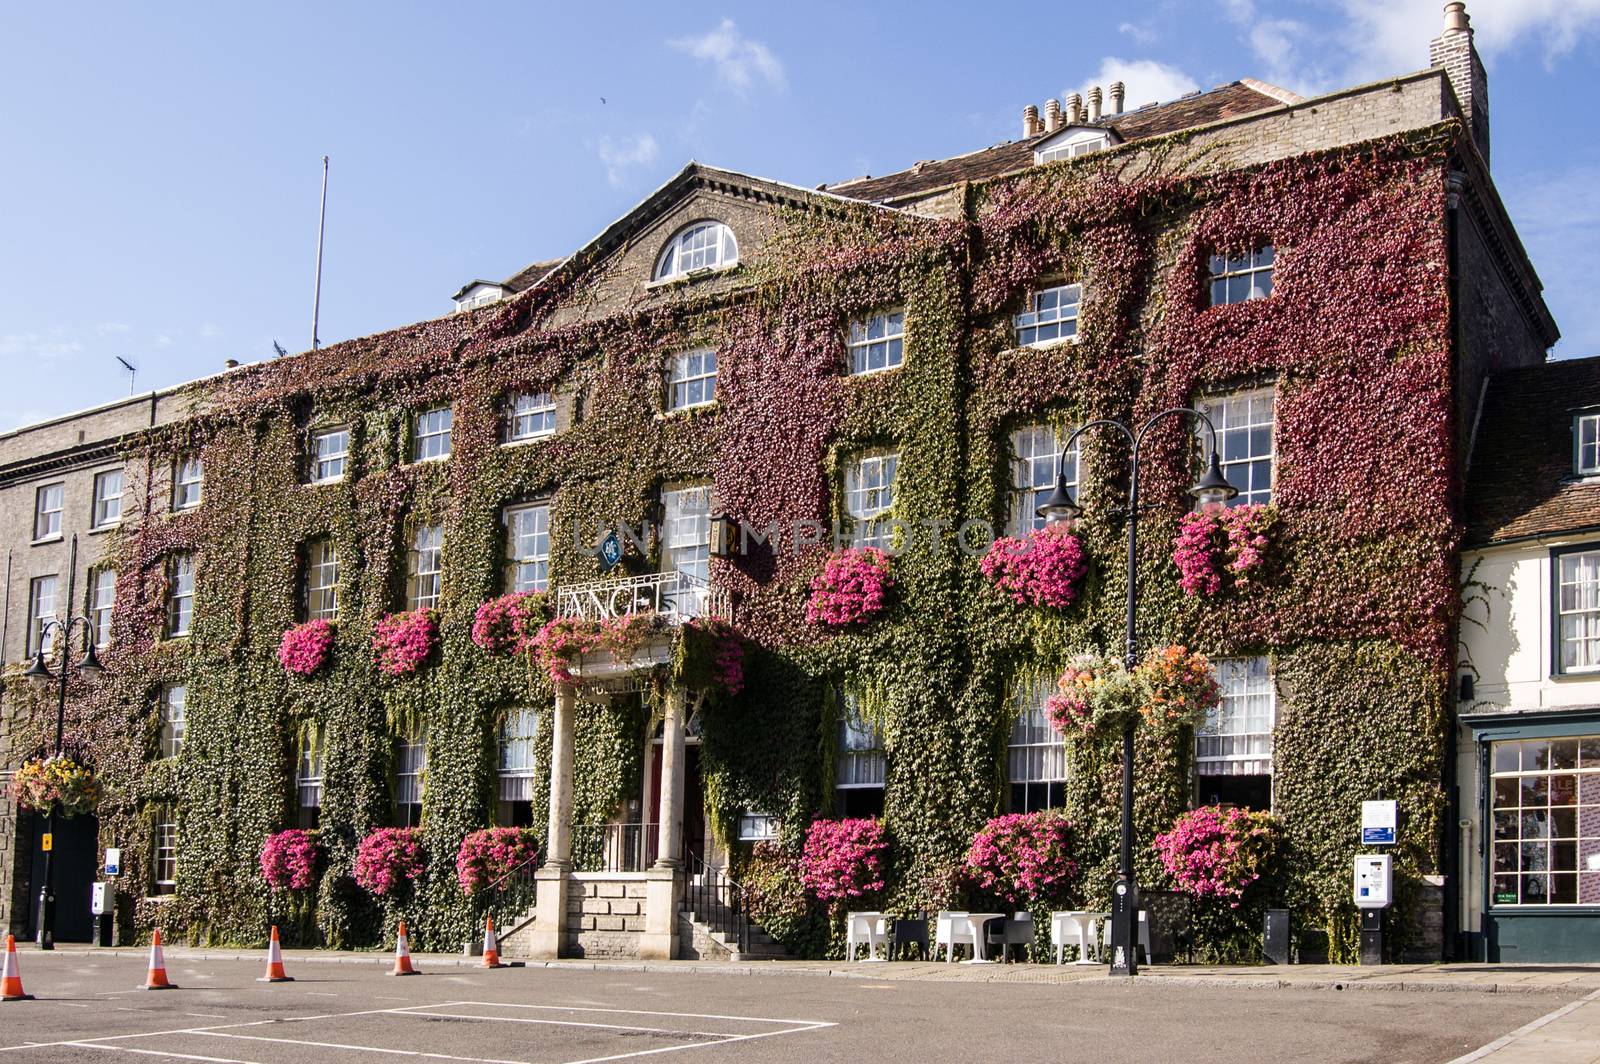 Bury St Edmunds, UK - September 19, 2011:  The historic Angel Hotel in the centre of Bury St Edmunds, Suffolk. This hotel has been welcoming guests for hundreds of years.